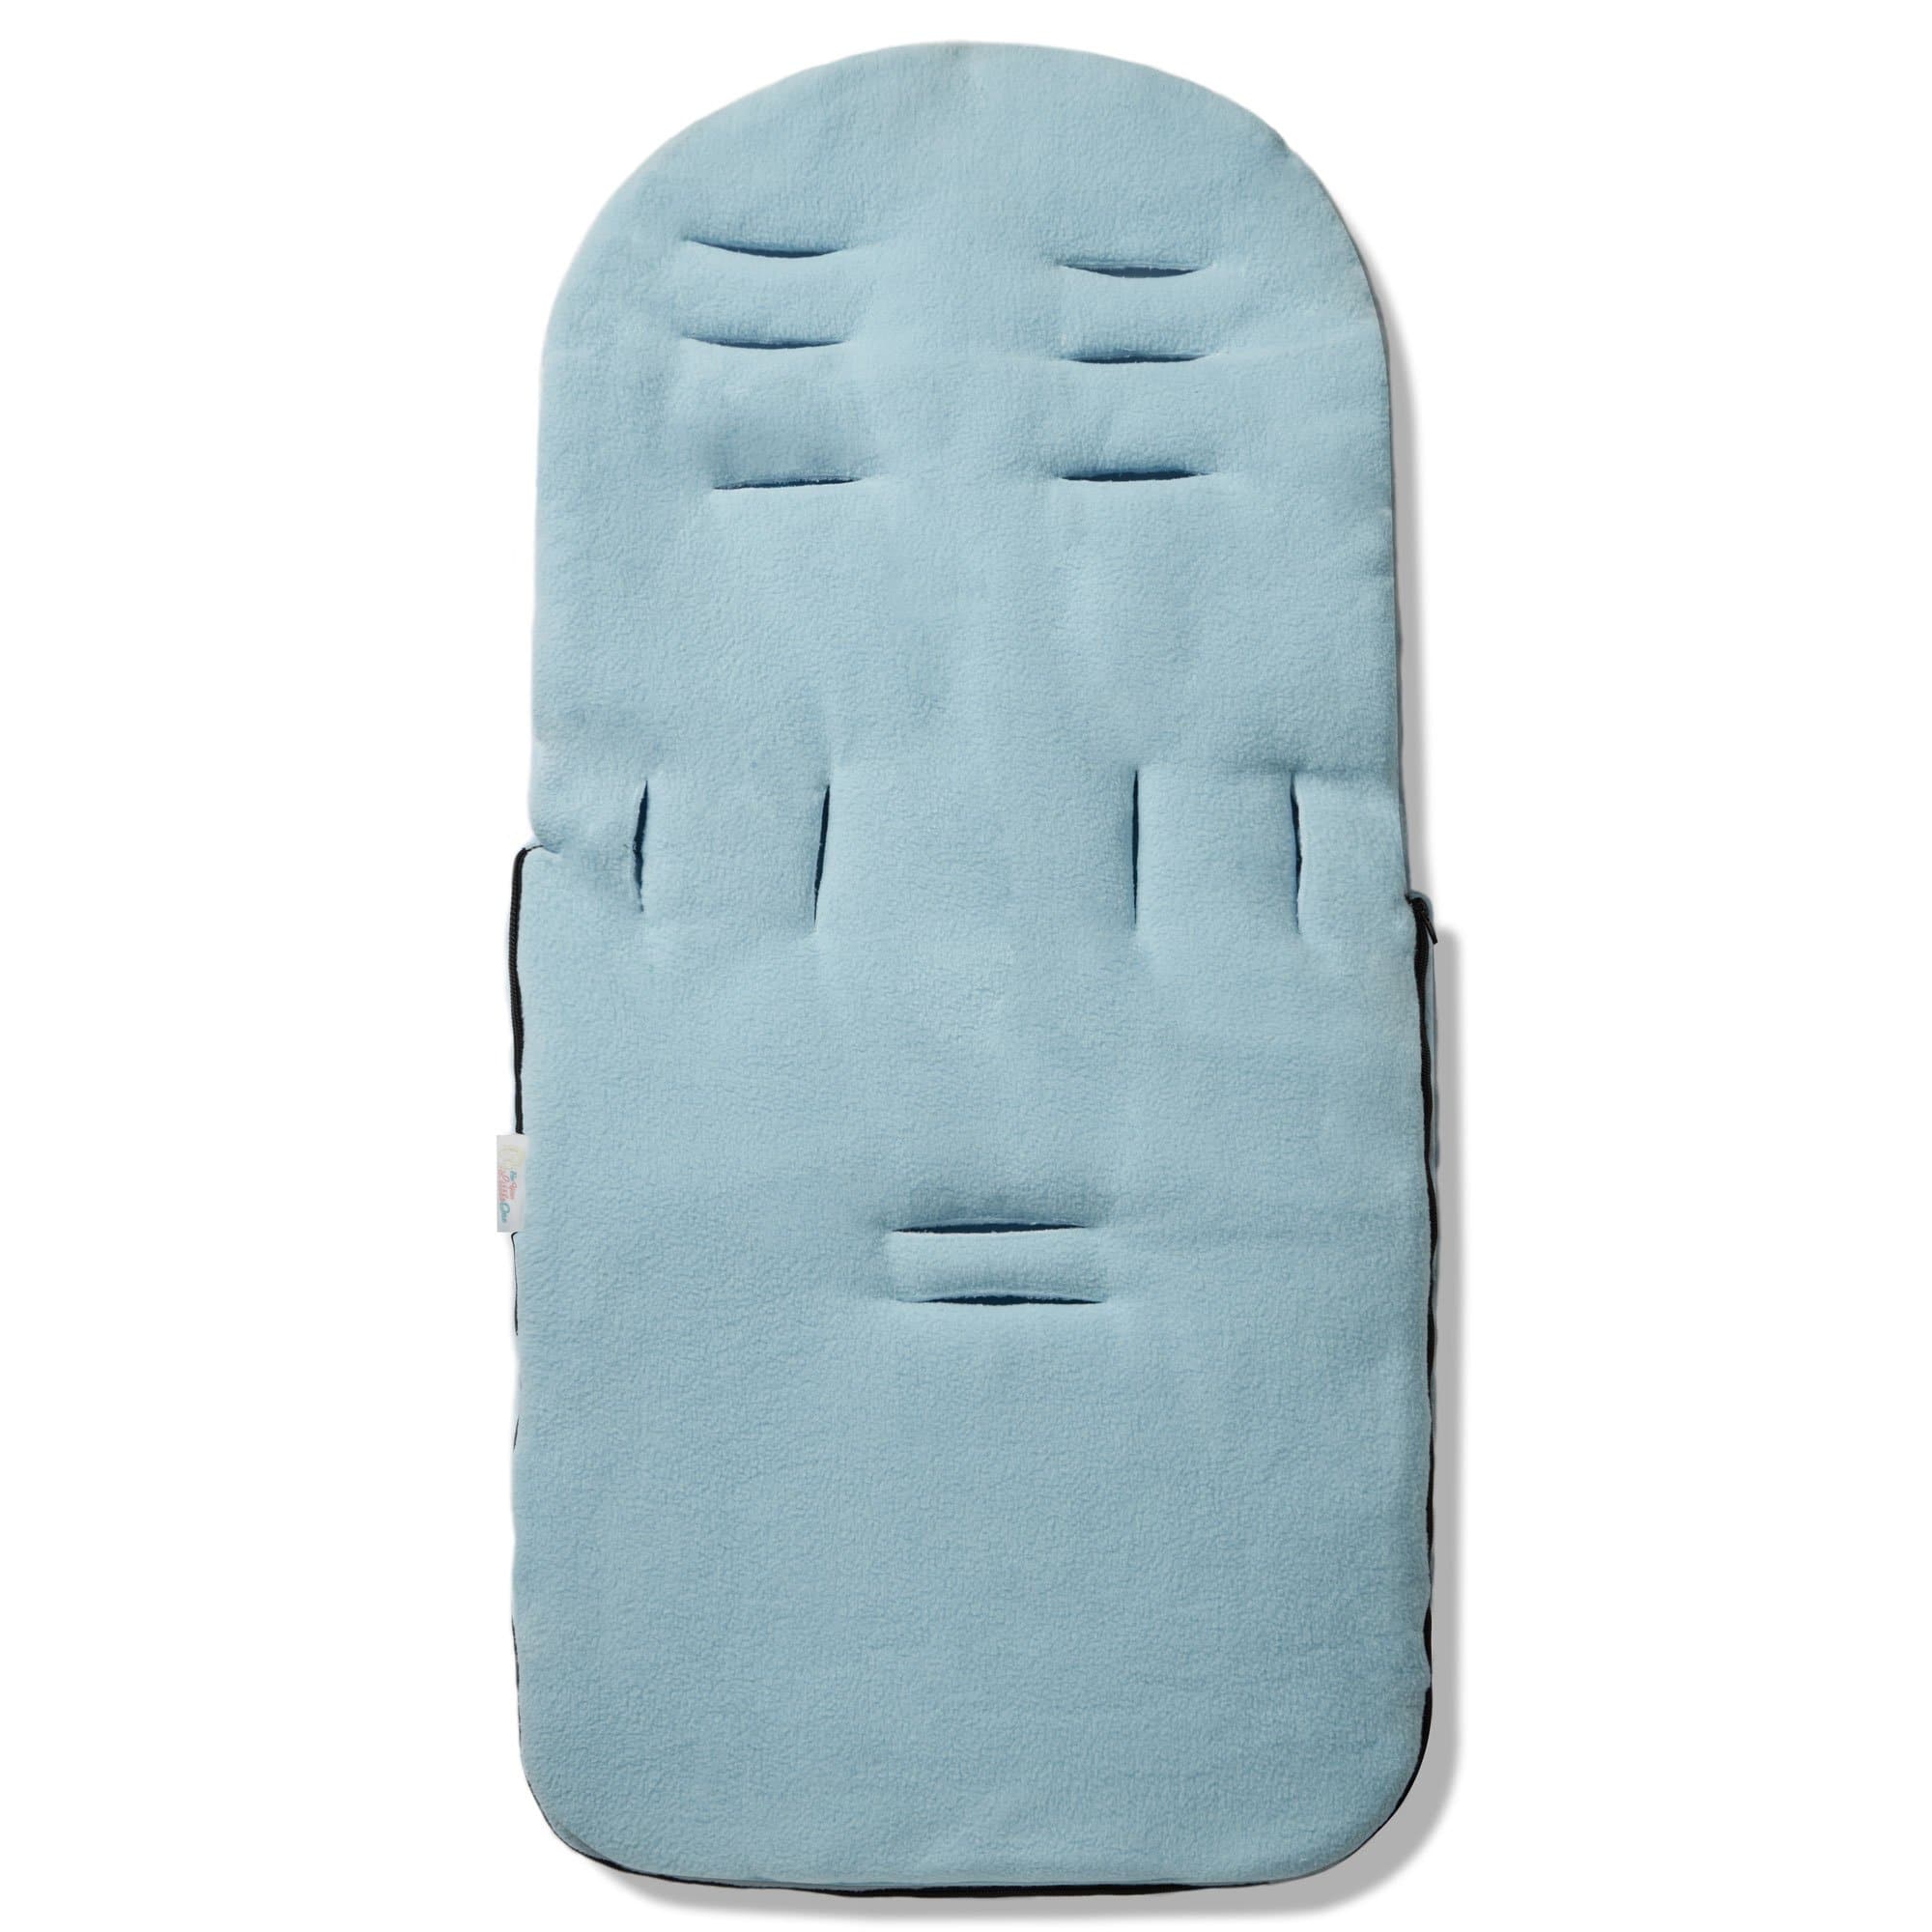 Dimple Footmuff / Cosy Toes Compatible with Maclaren - For Your Little One